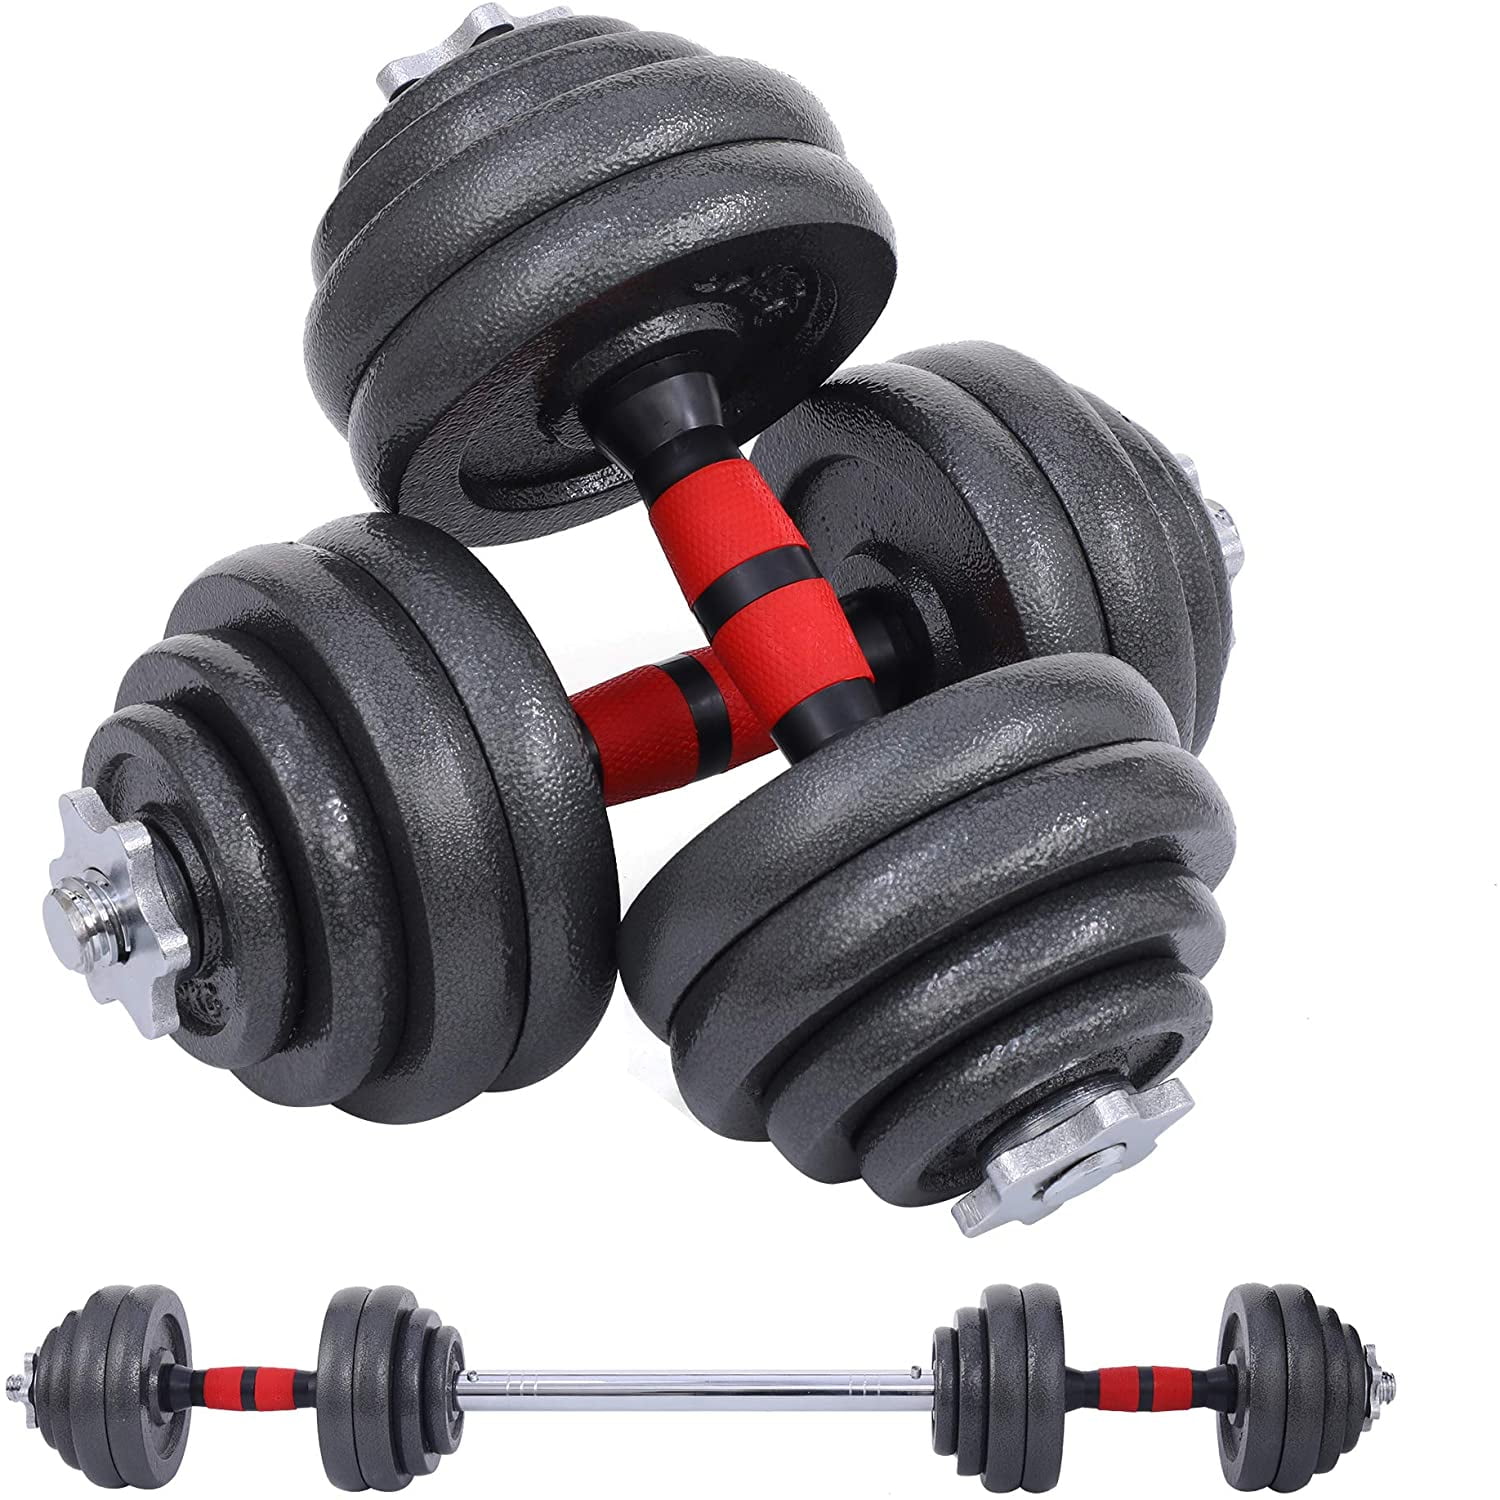 Adjustable Dumbbell Set Barbell Home GYM Fitness Workout Weight Exercise 33-66lb